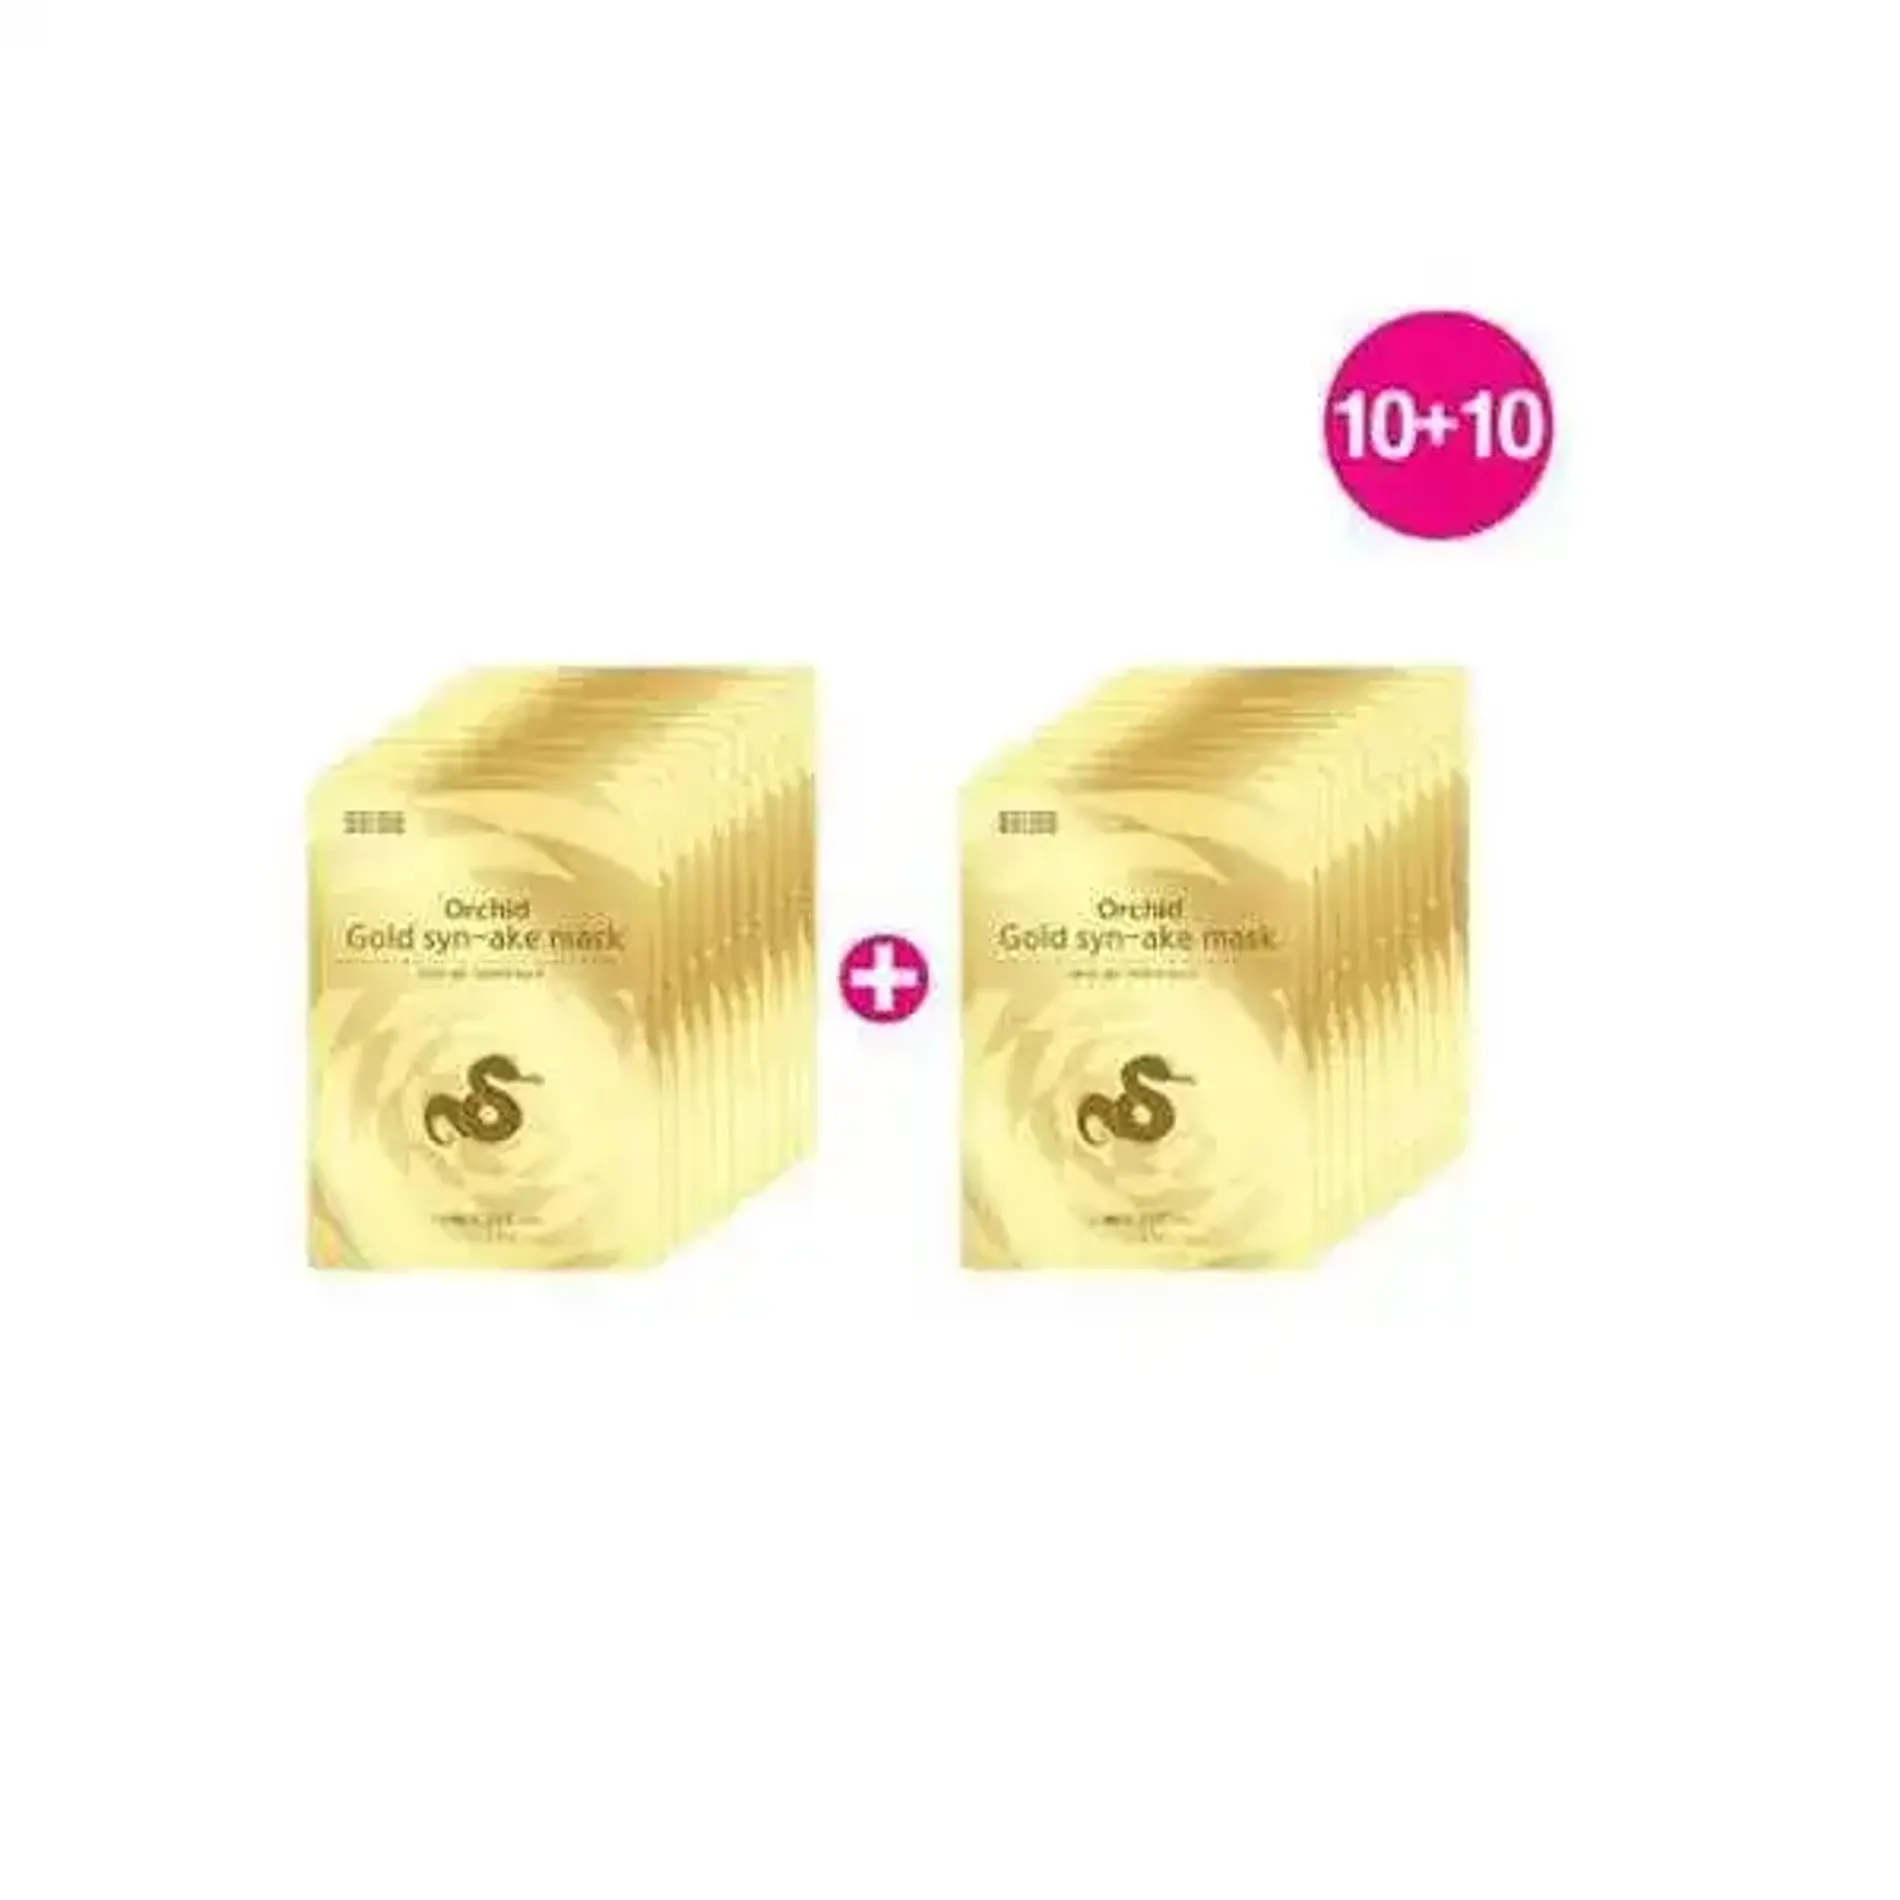 mat-na-giay-the-orchid-skin-gold-syn-ake-mask-3